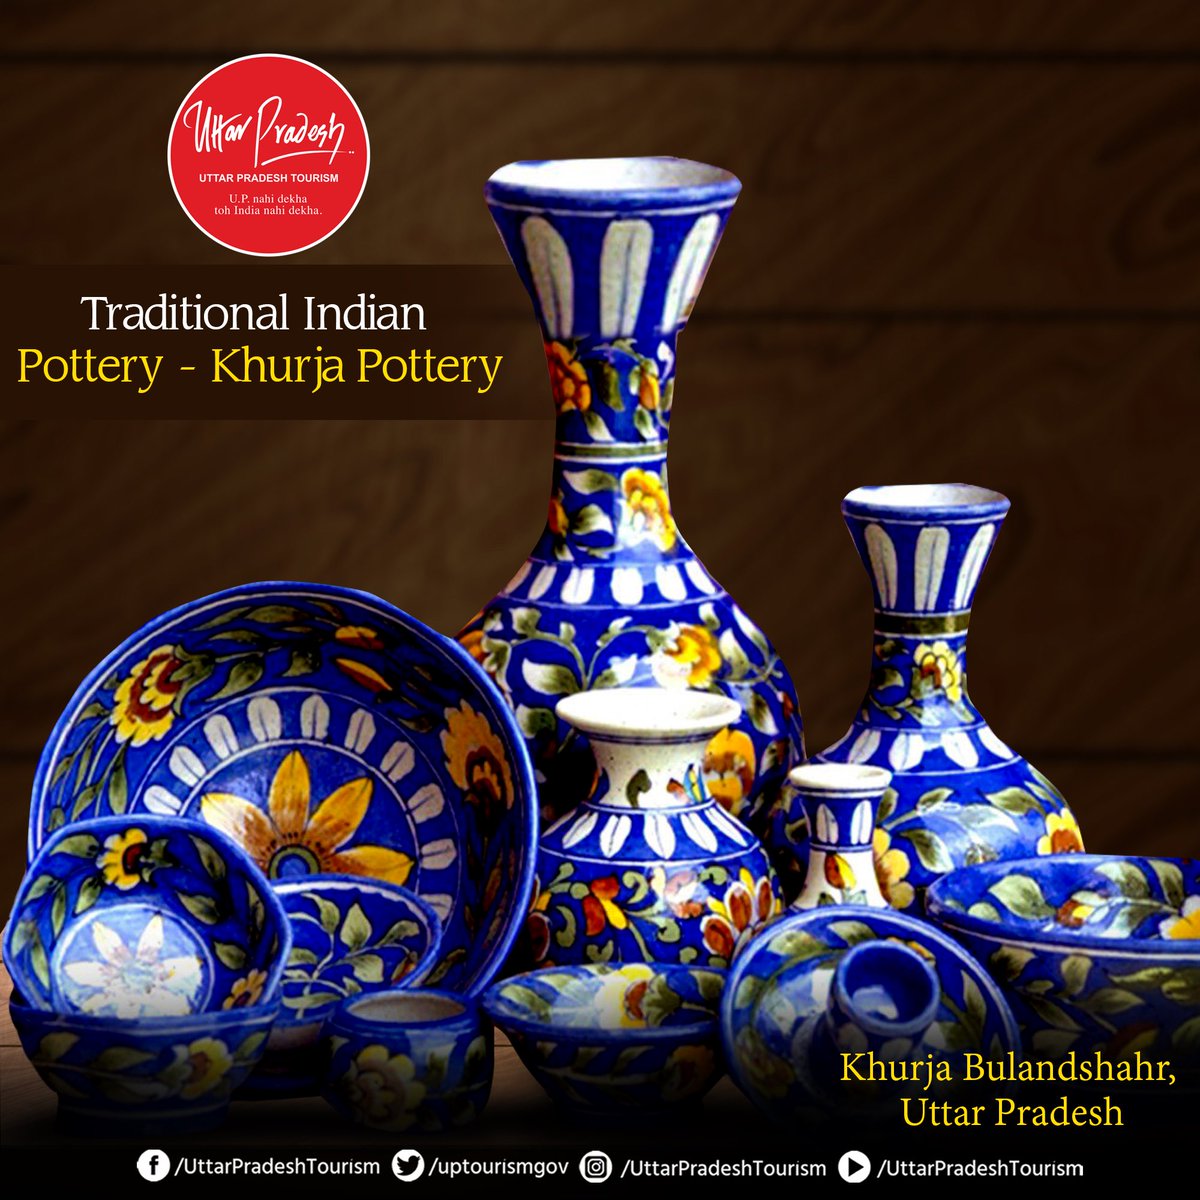 Open yourself to the rich heritage of #KhurjaPottery, a traditional Indian craft widely available in #Bulandshahr. From pots & crockery to diffusers & miniature toys, the exquisite creations are an imprint of the region's craftsmanship. Have you indulged in these treasures yet?